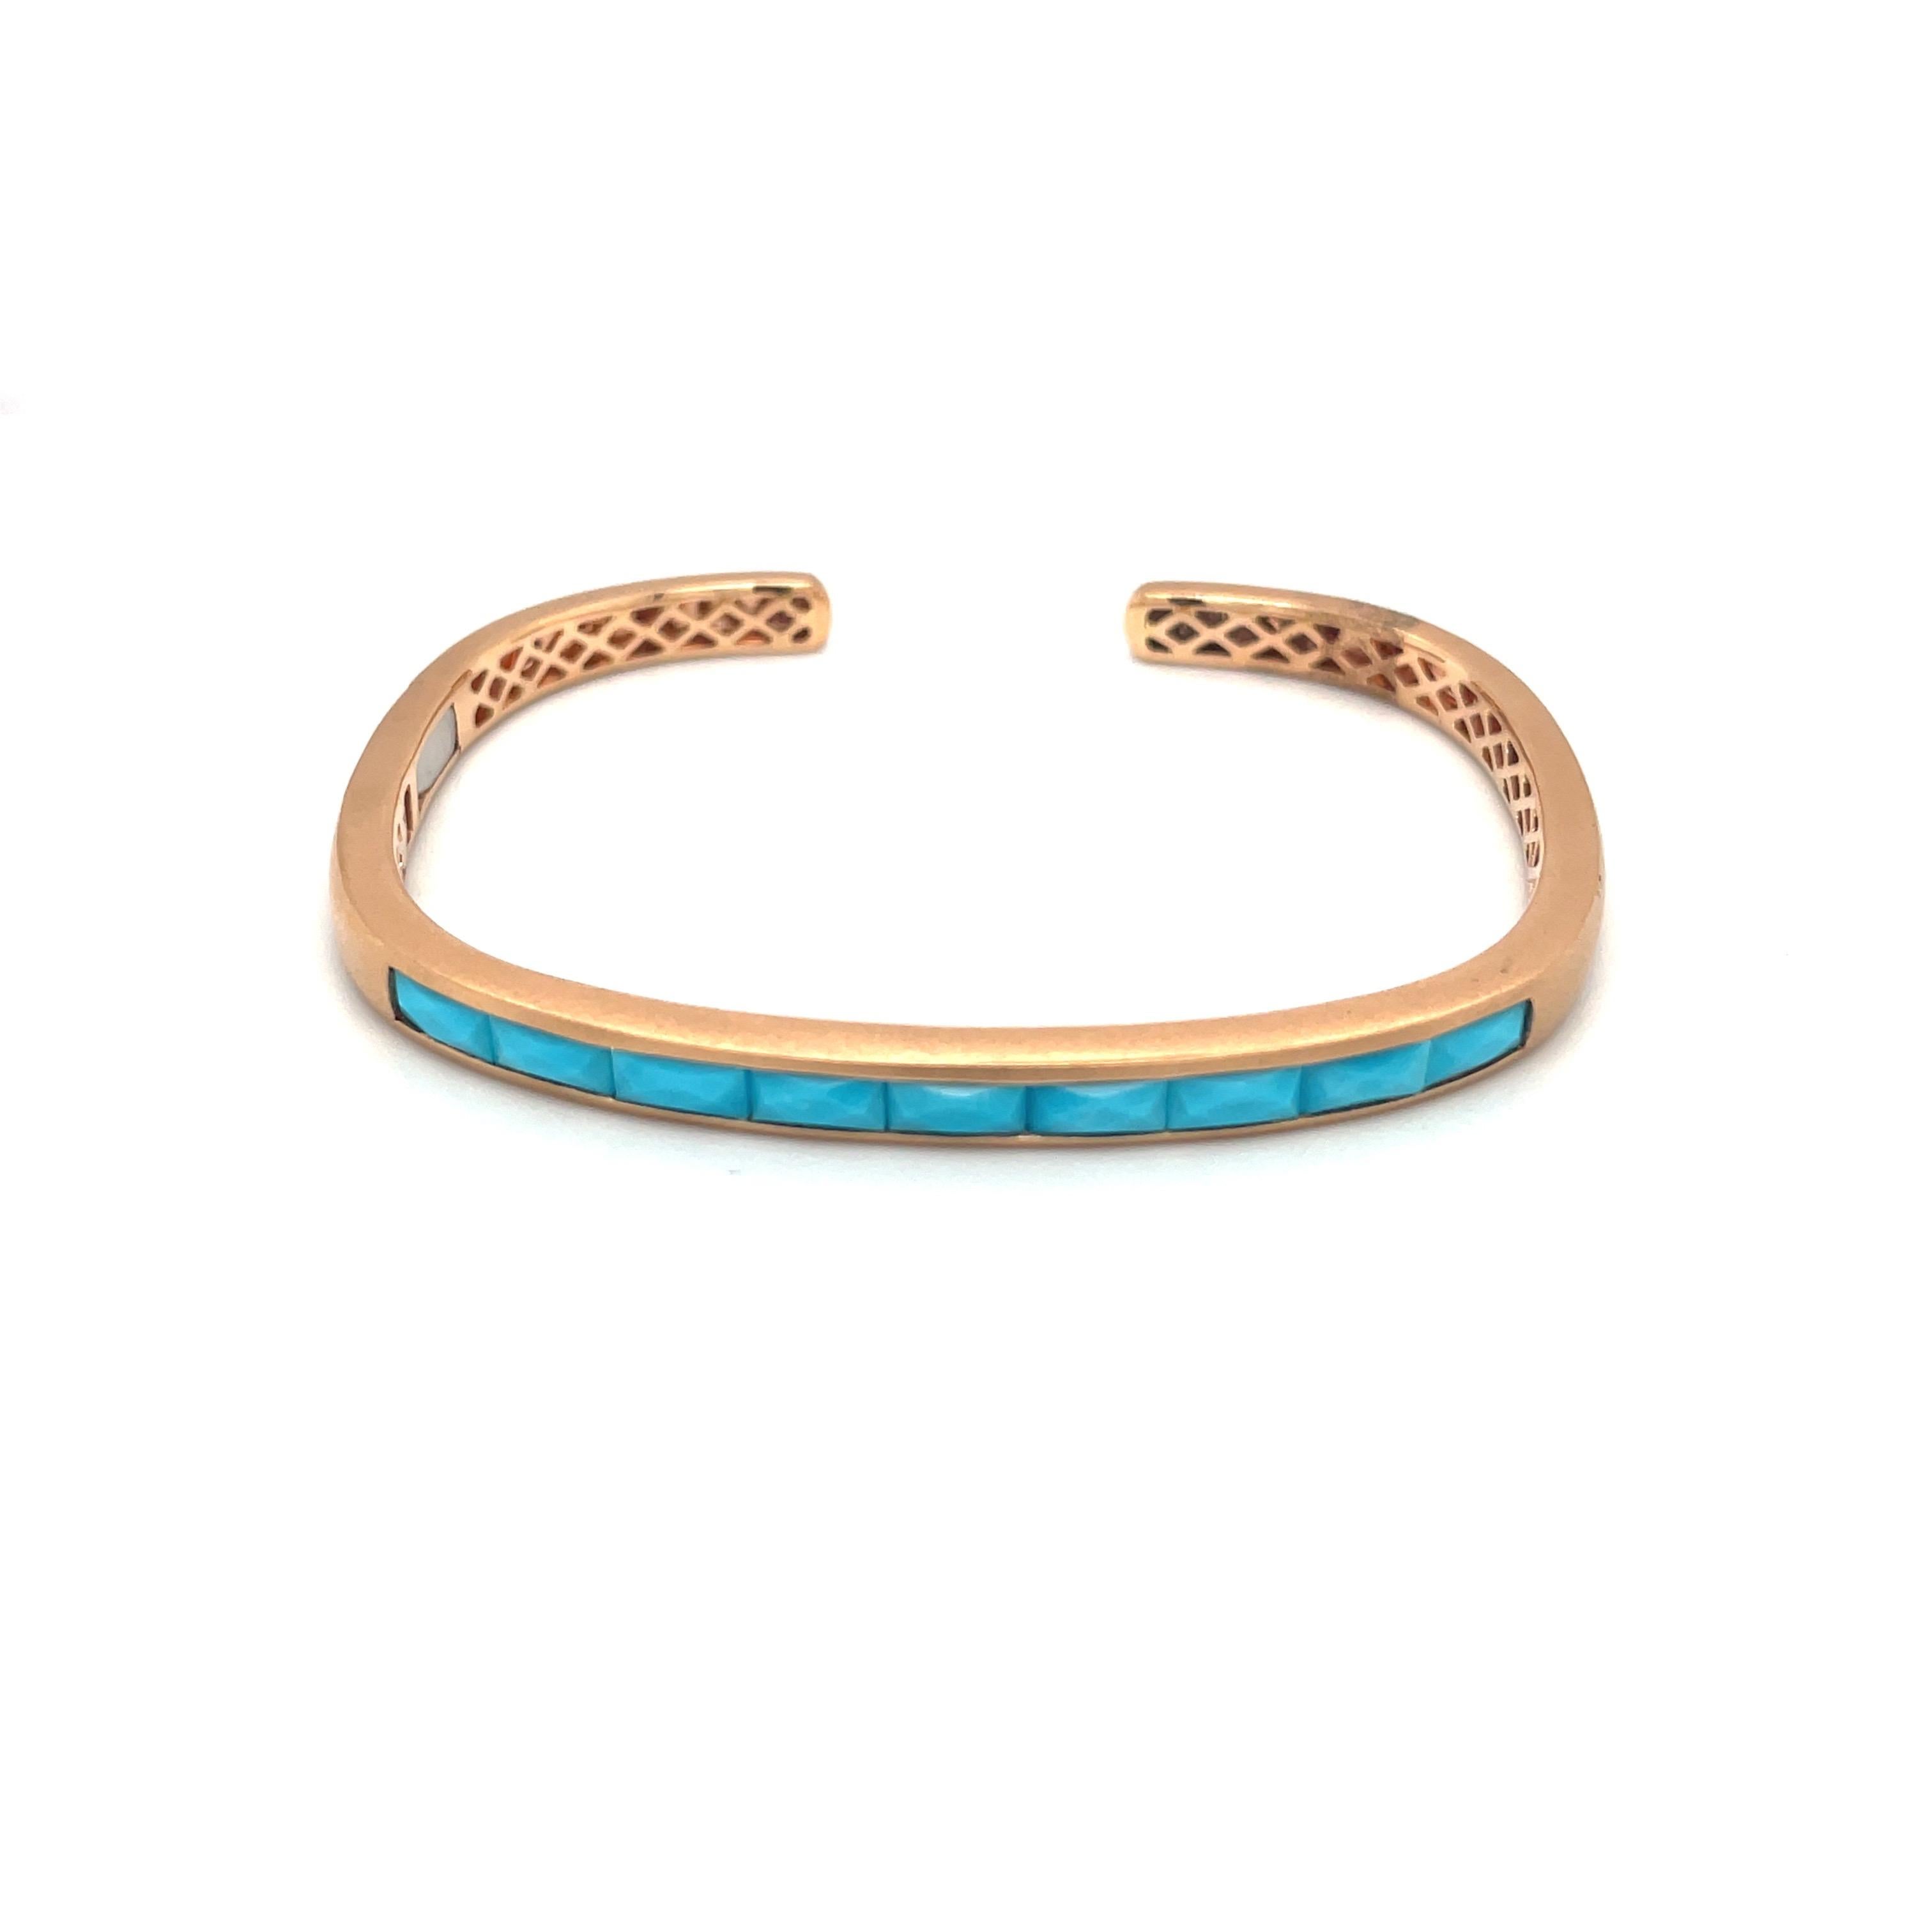 Jane Taylor Jewelry is a family run company focused on creating modern heirlooms since 1994.
This 18 karat rose gold cuff bracelet has a squarish shape and a matte finish. It is set across the top with 3.04 carats of French cut turquoise stones.The